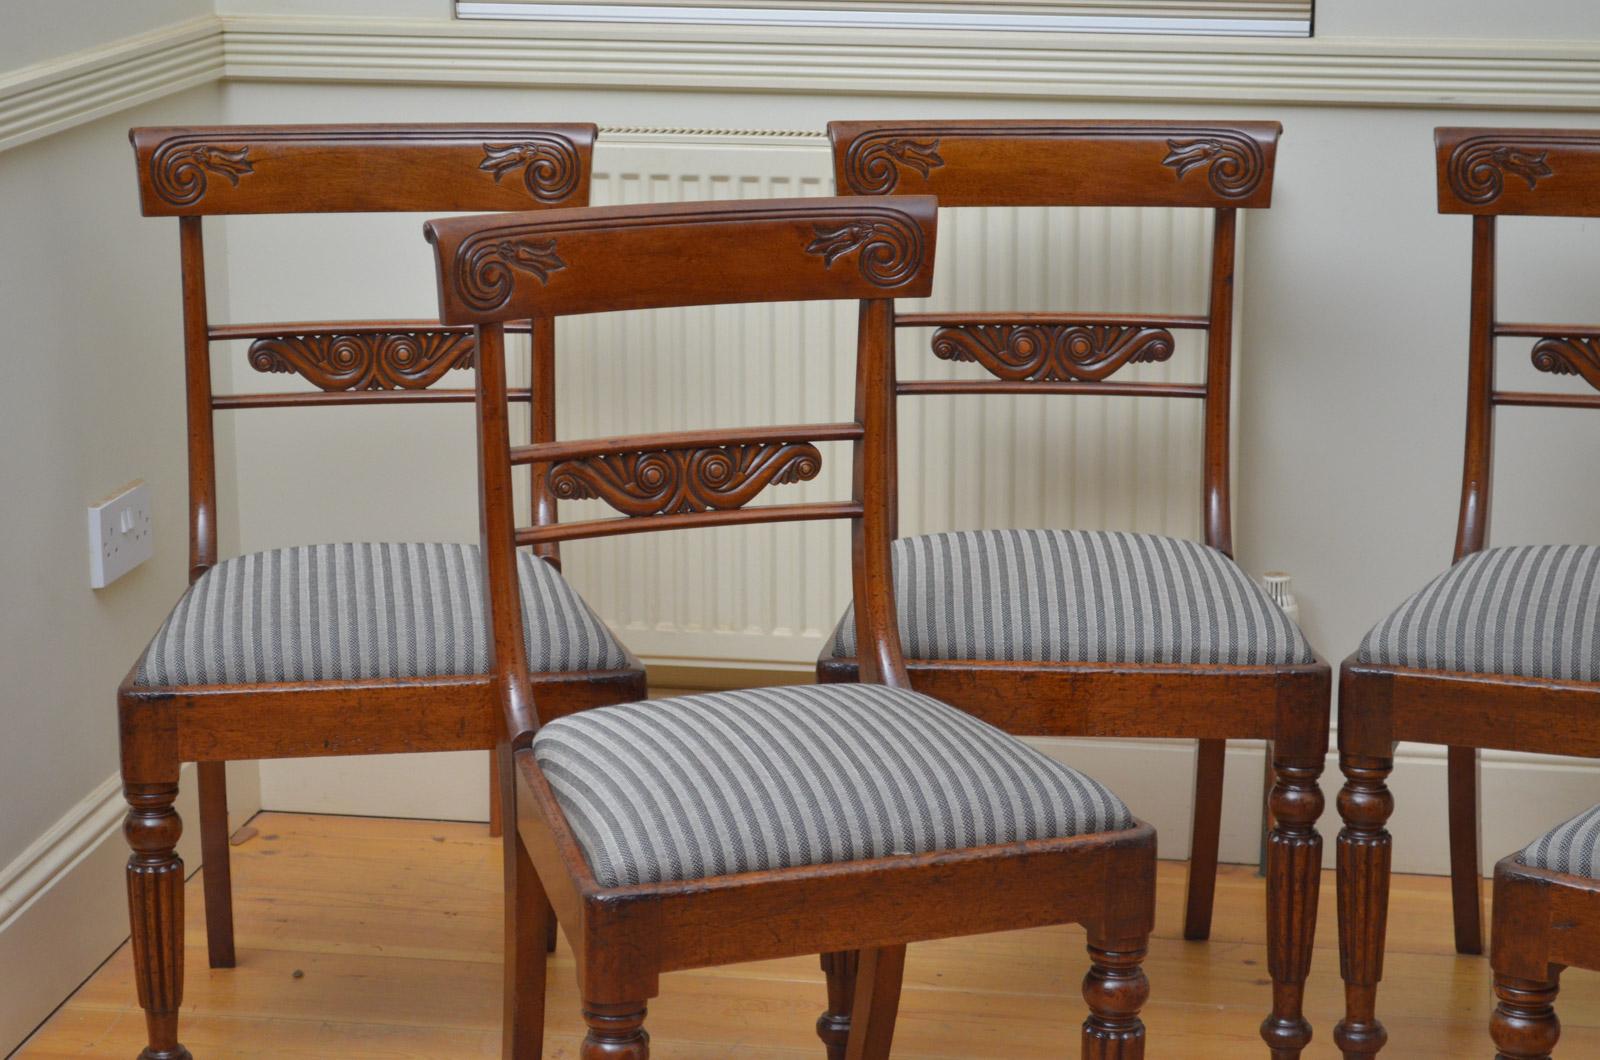 Sn4448, set of six mahogany dining chairs, each having shaped can carved top rails with finely carved mid rail below, drop in seat covered in complementary fabric, standing on turned and fluted legs. This set of antique dining chairs retains